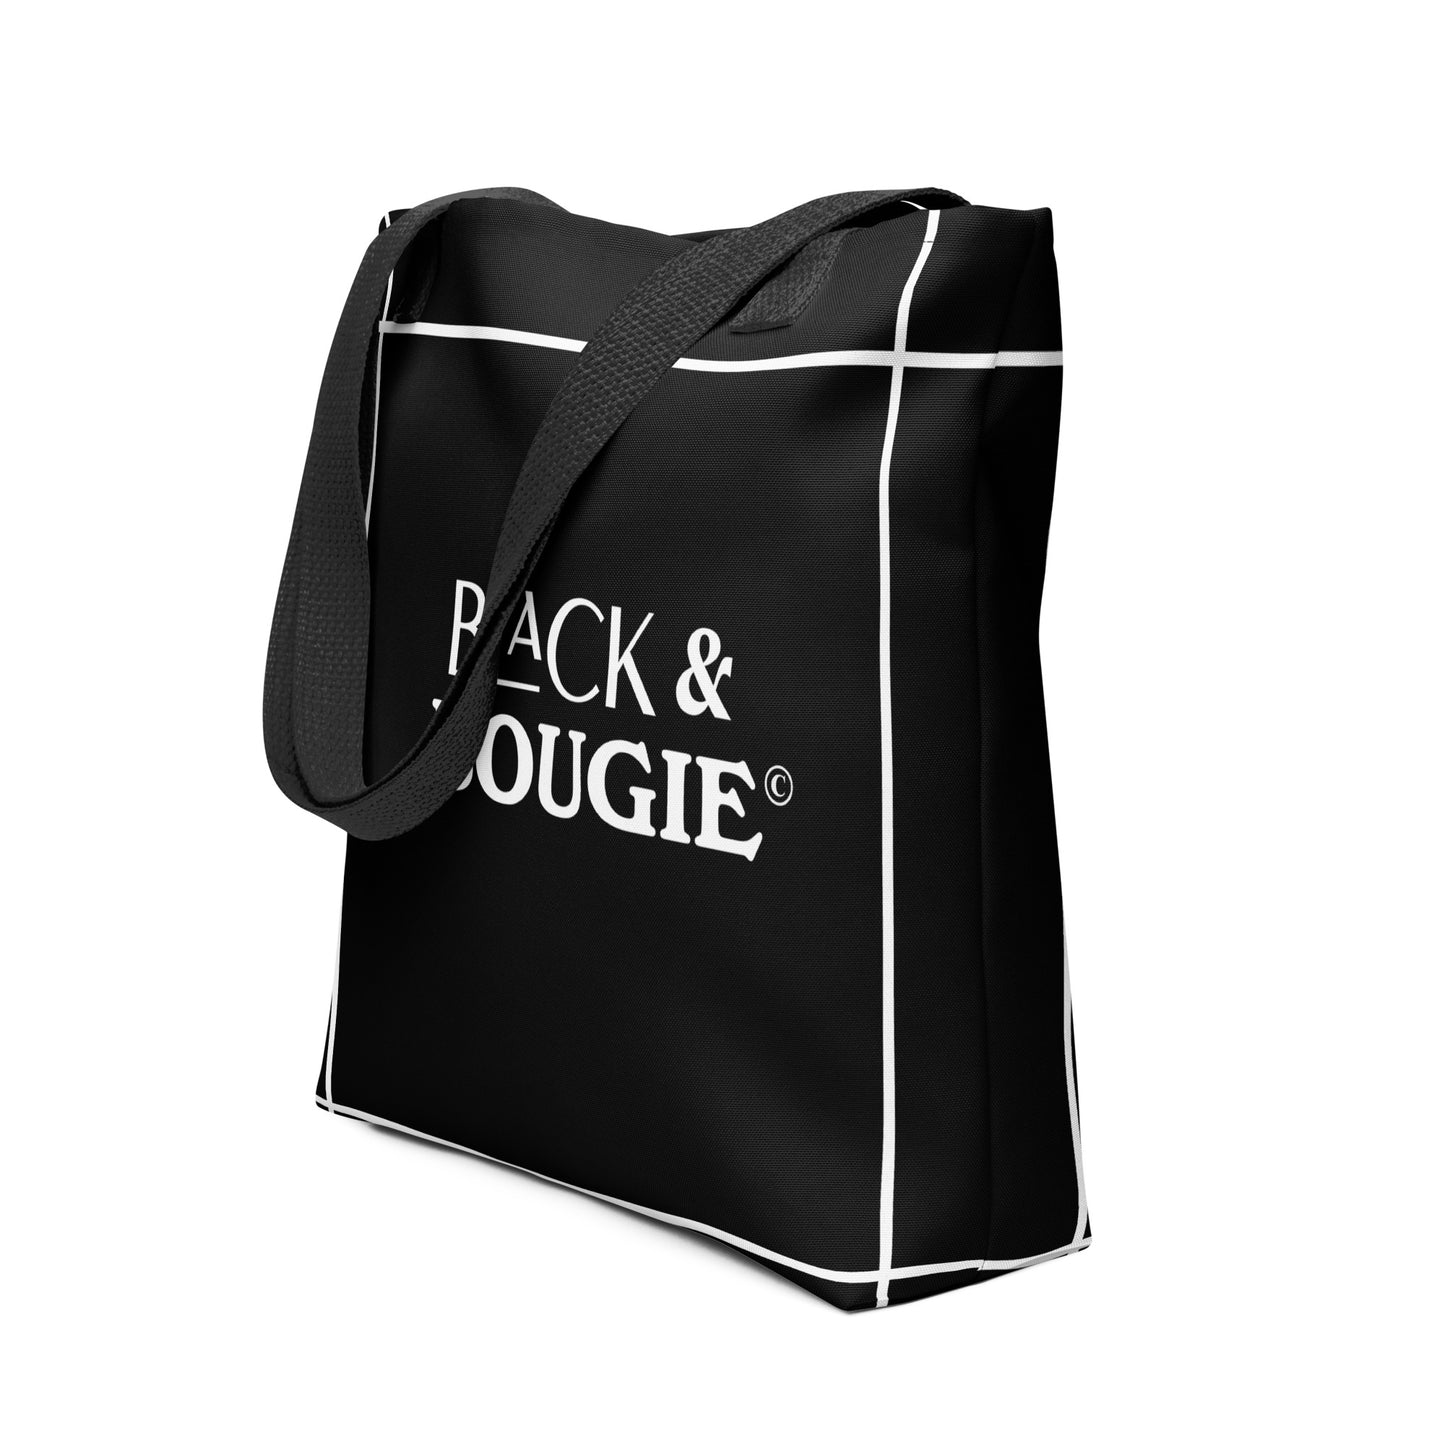 Black & Bougie Poly Fabric Tote bag